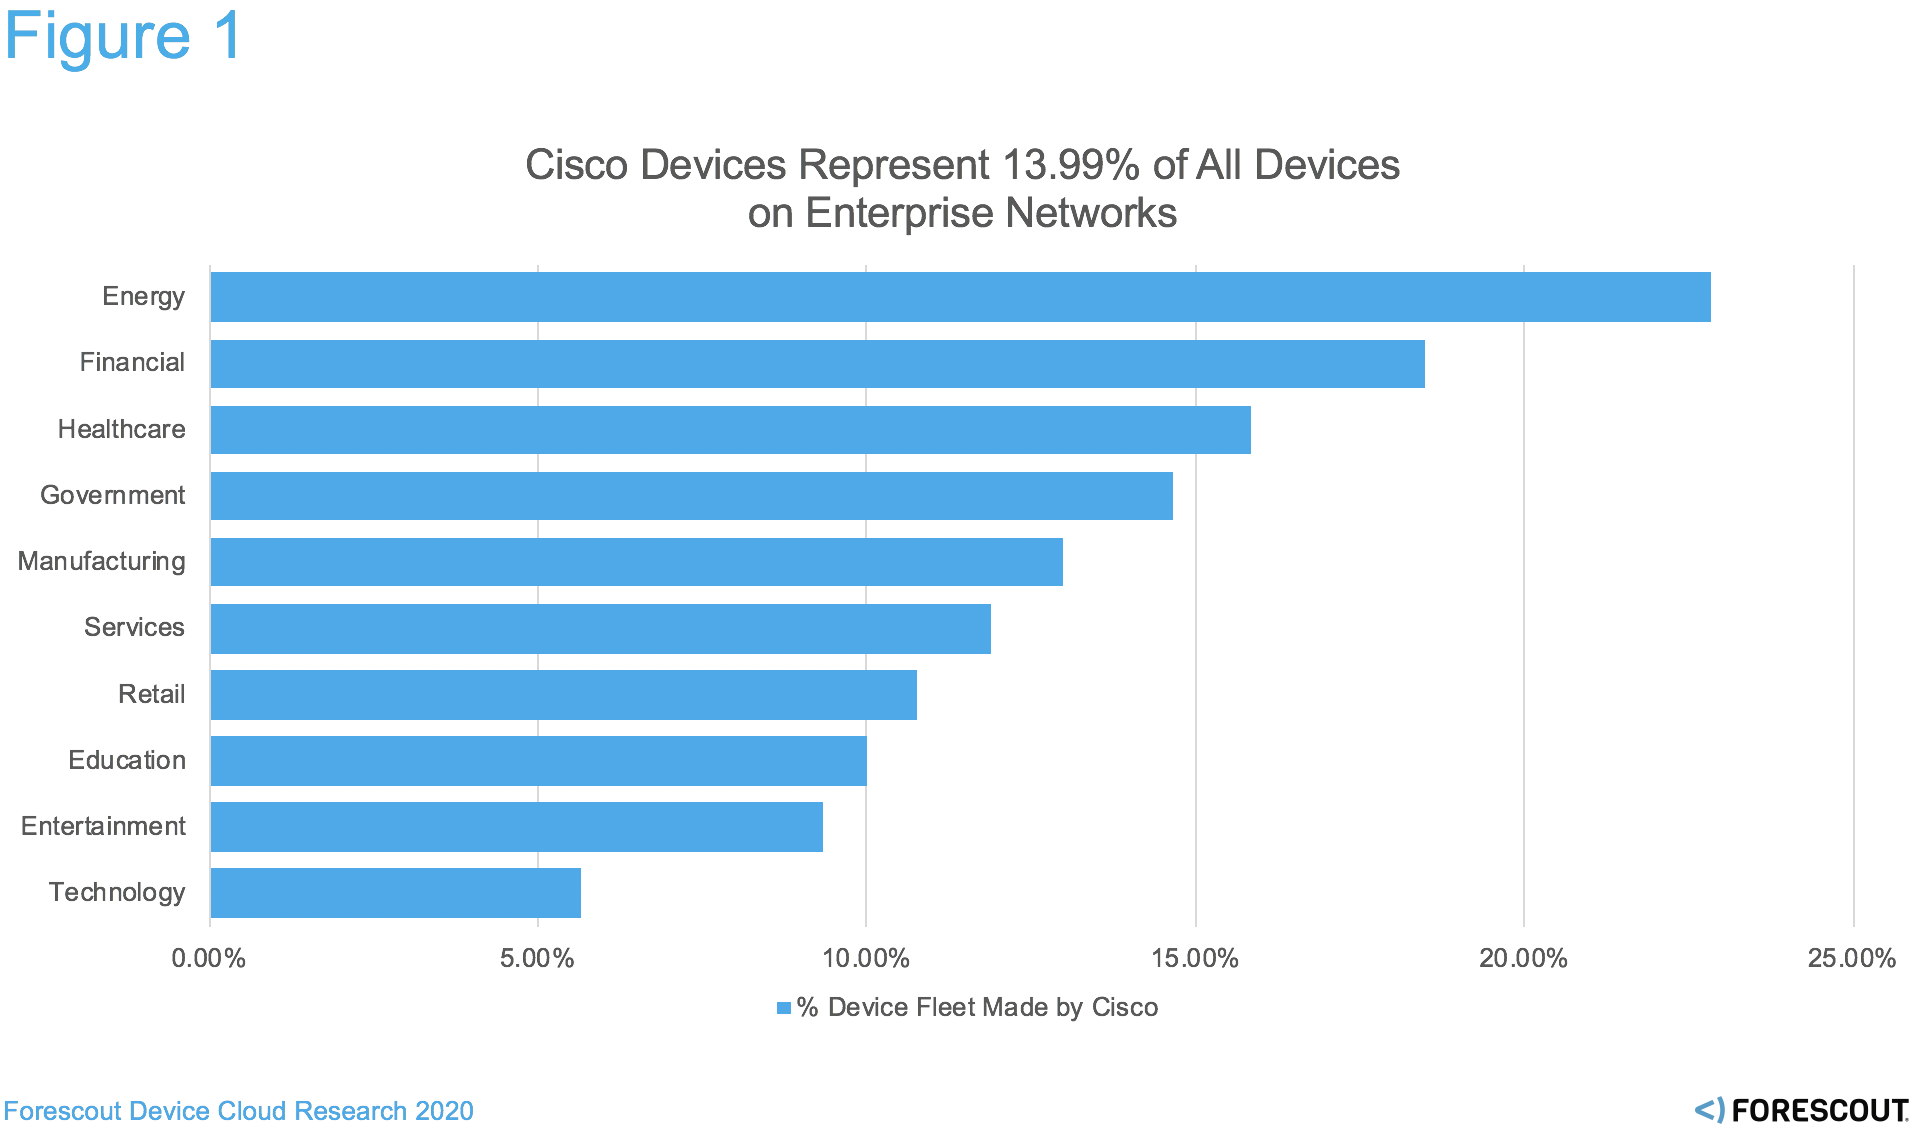 Cisco makes almost 1:7 devices on enterprise networks today